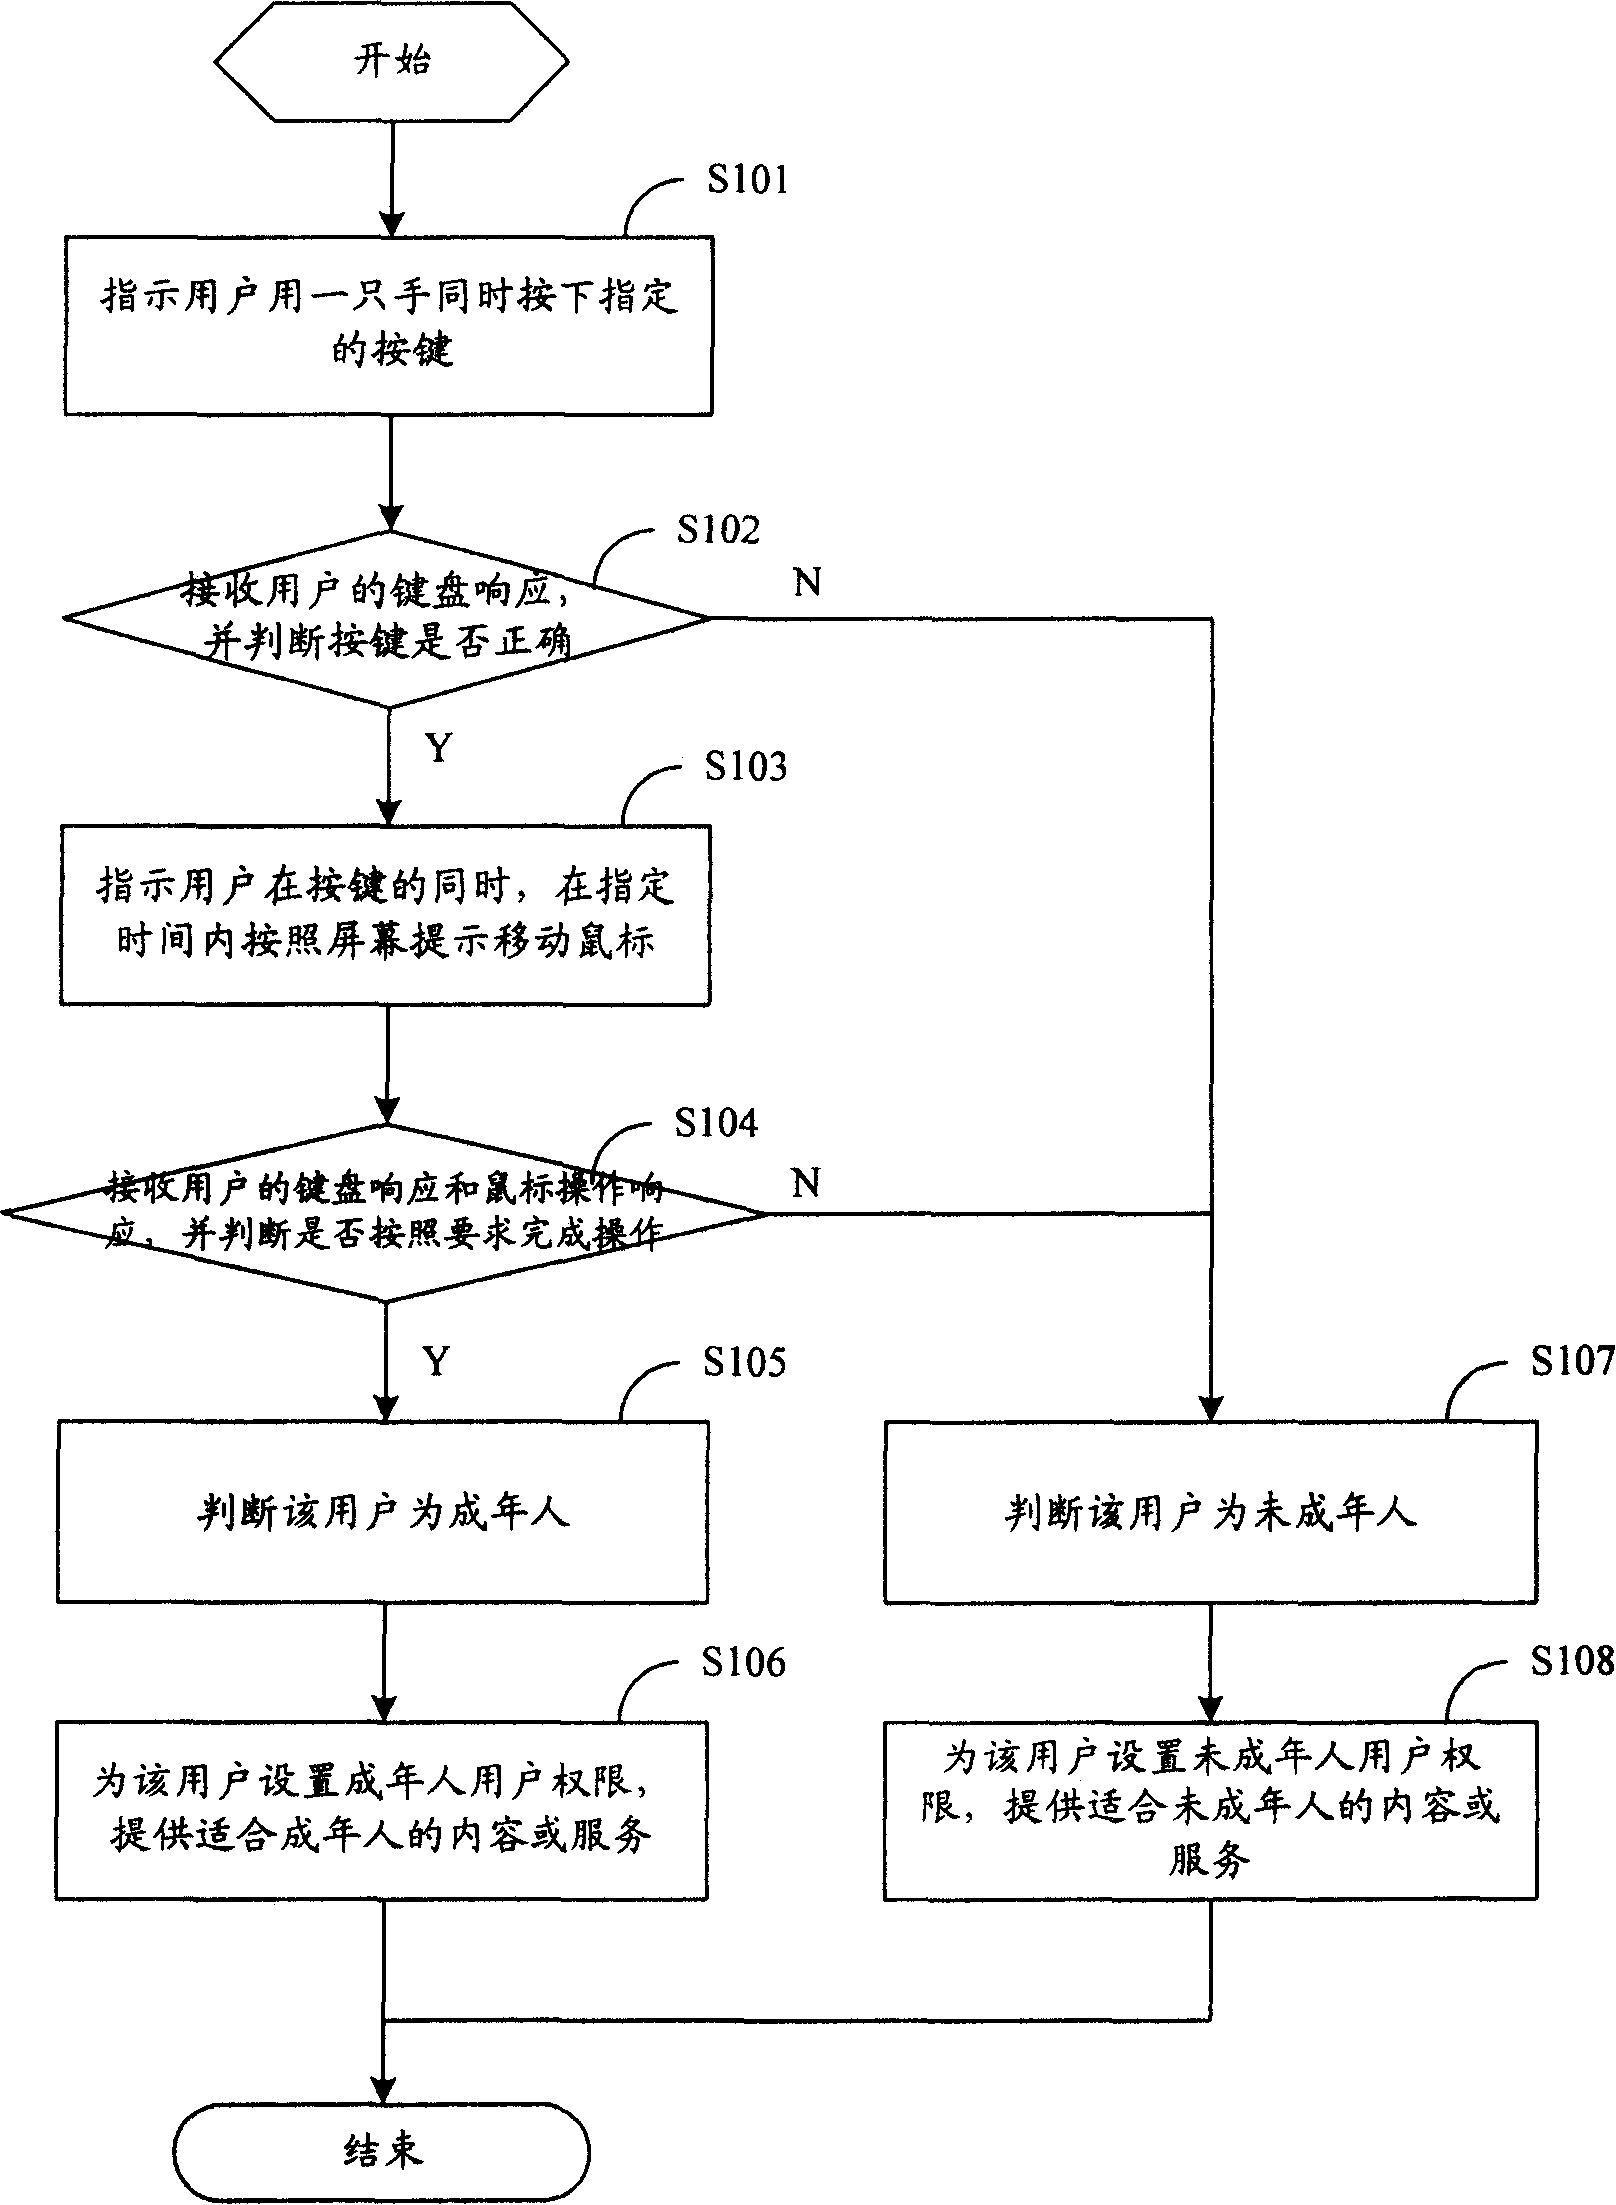 Method and device for detecting age of user